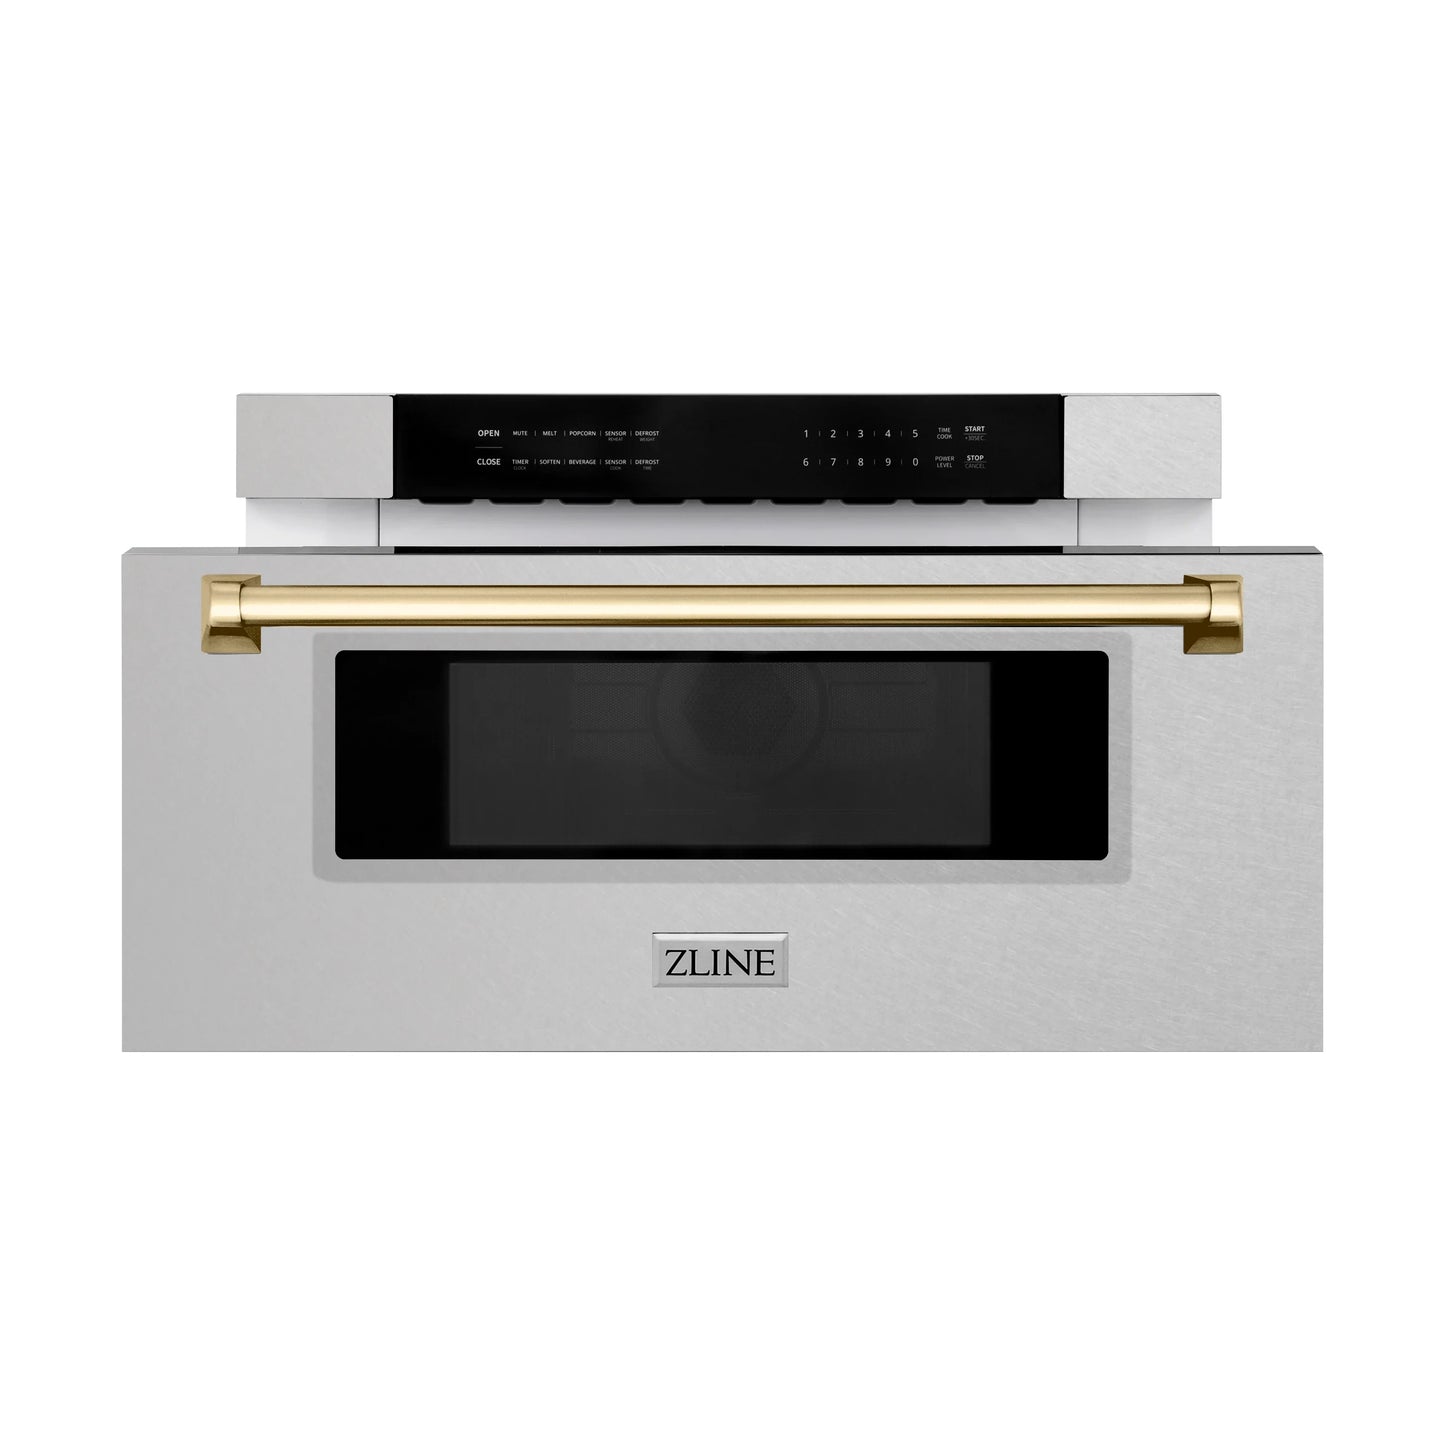 ZLINE Autograph Edition 30"  Built-In Microwave Drawer in Fingerprint Resistant Stainless Steel with Accents